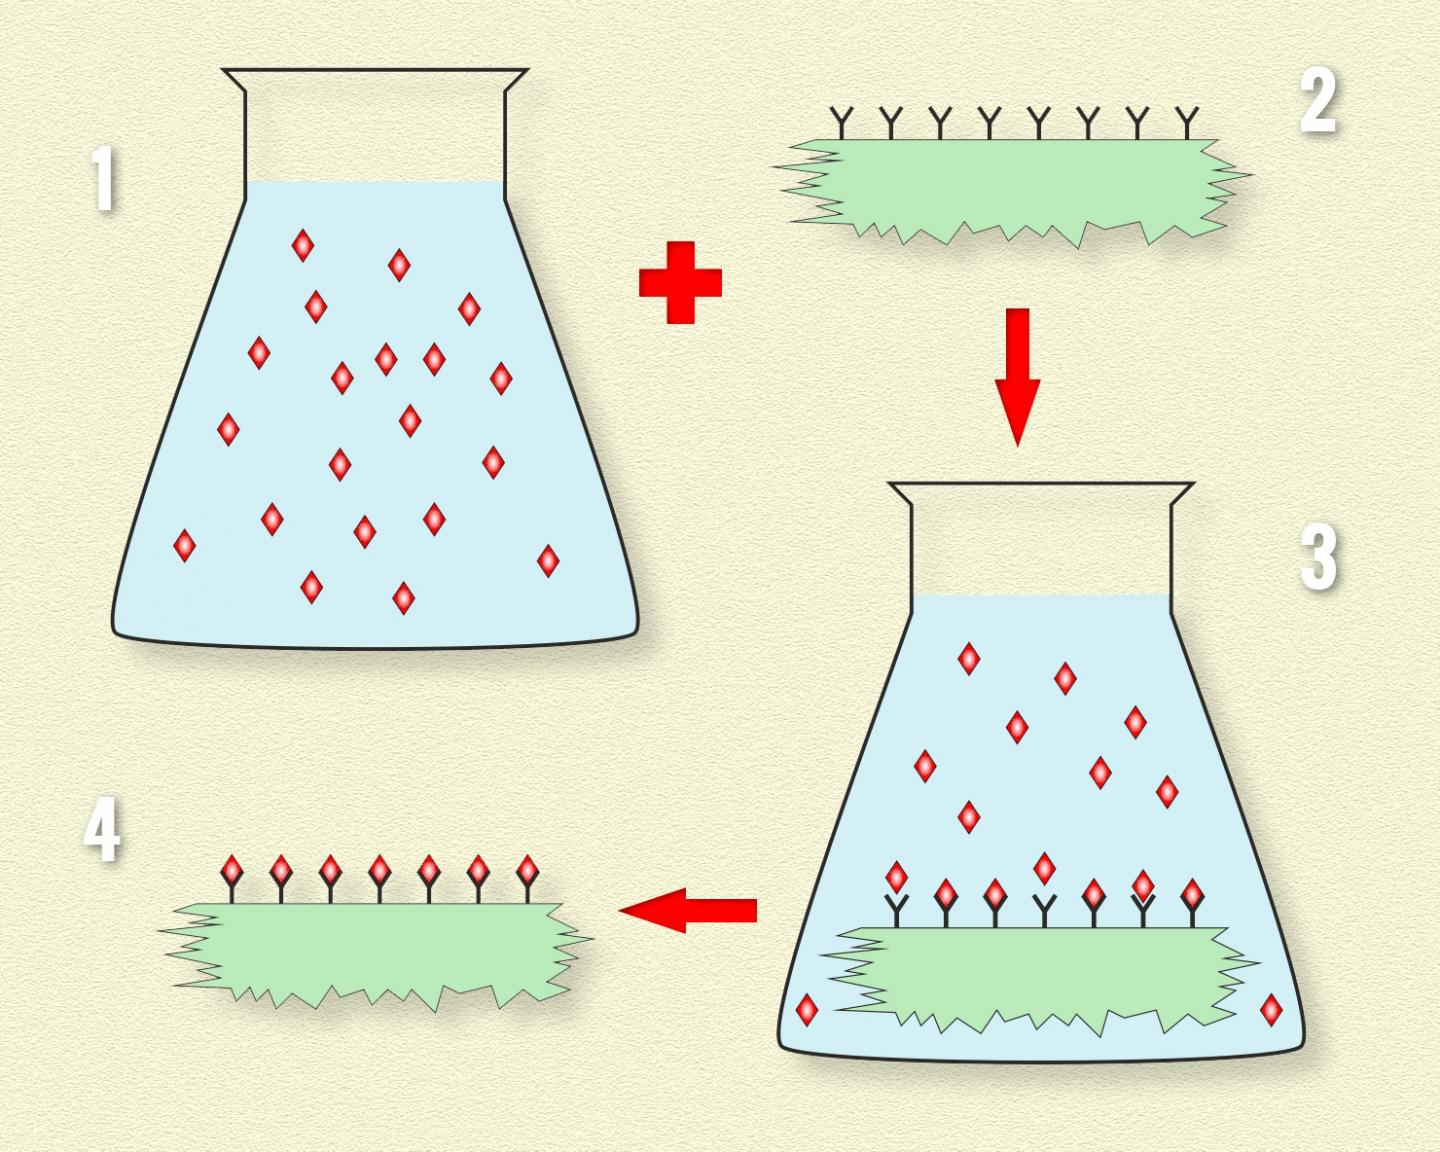 Synthesis of new material using a solid solvent